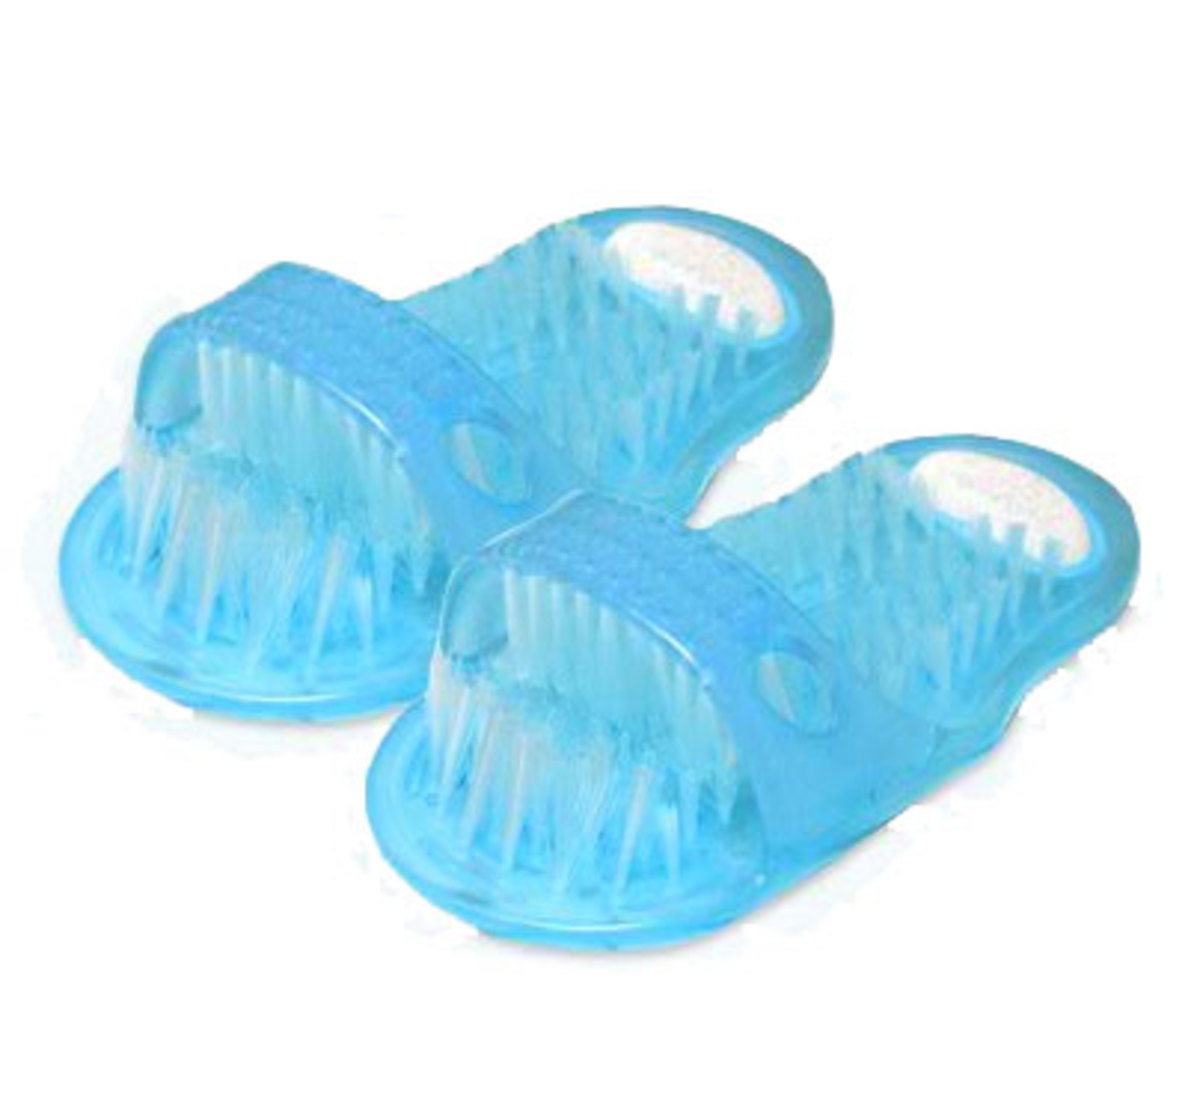 Tired of scrubbing those smelly feet... this may be the perfect product for you!